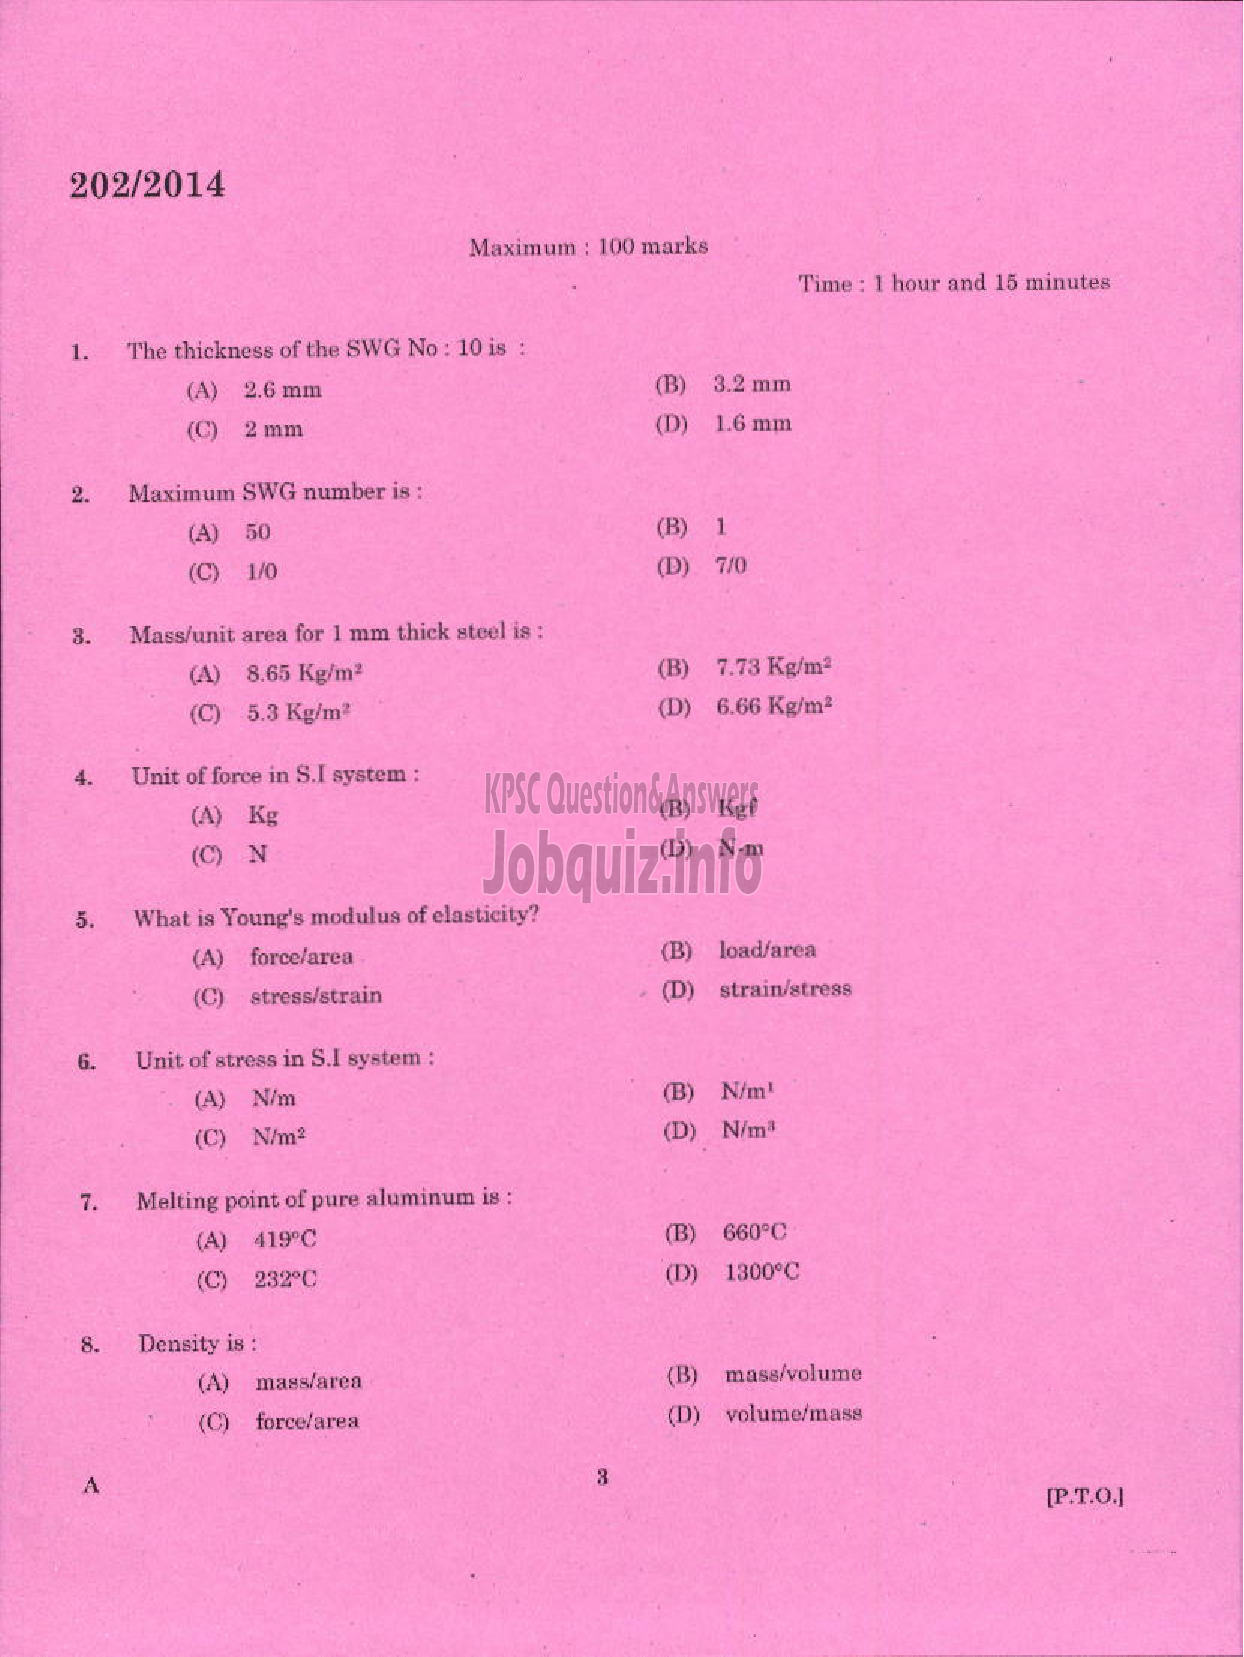 Kerala PSC Question Paper - TRADESMAN SHEET METAL ENGINEERING TECHNICAL EDUCATION TVM PTA IDK WYD AND KGD-1